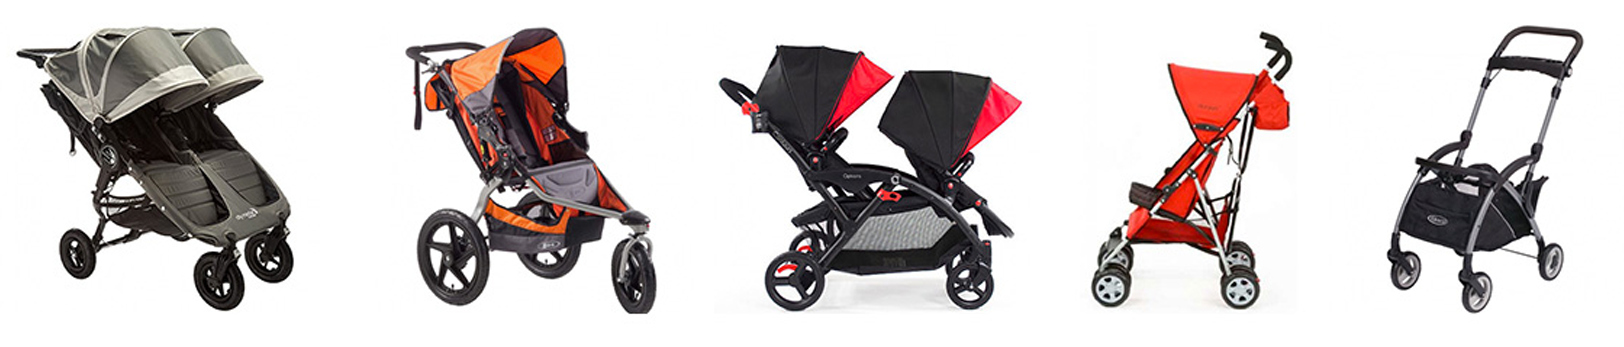 first step baby stroller price